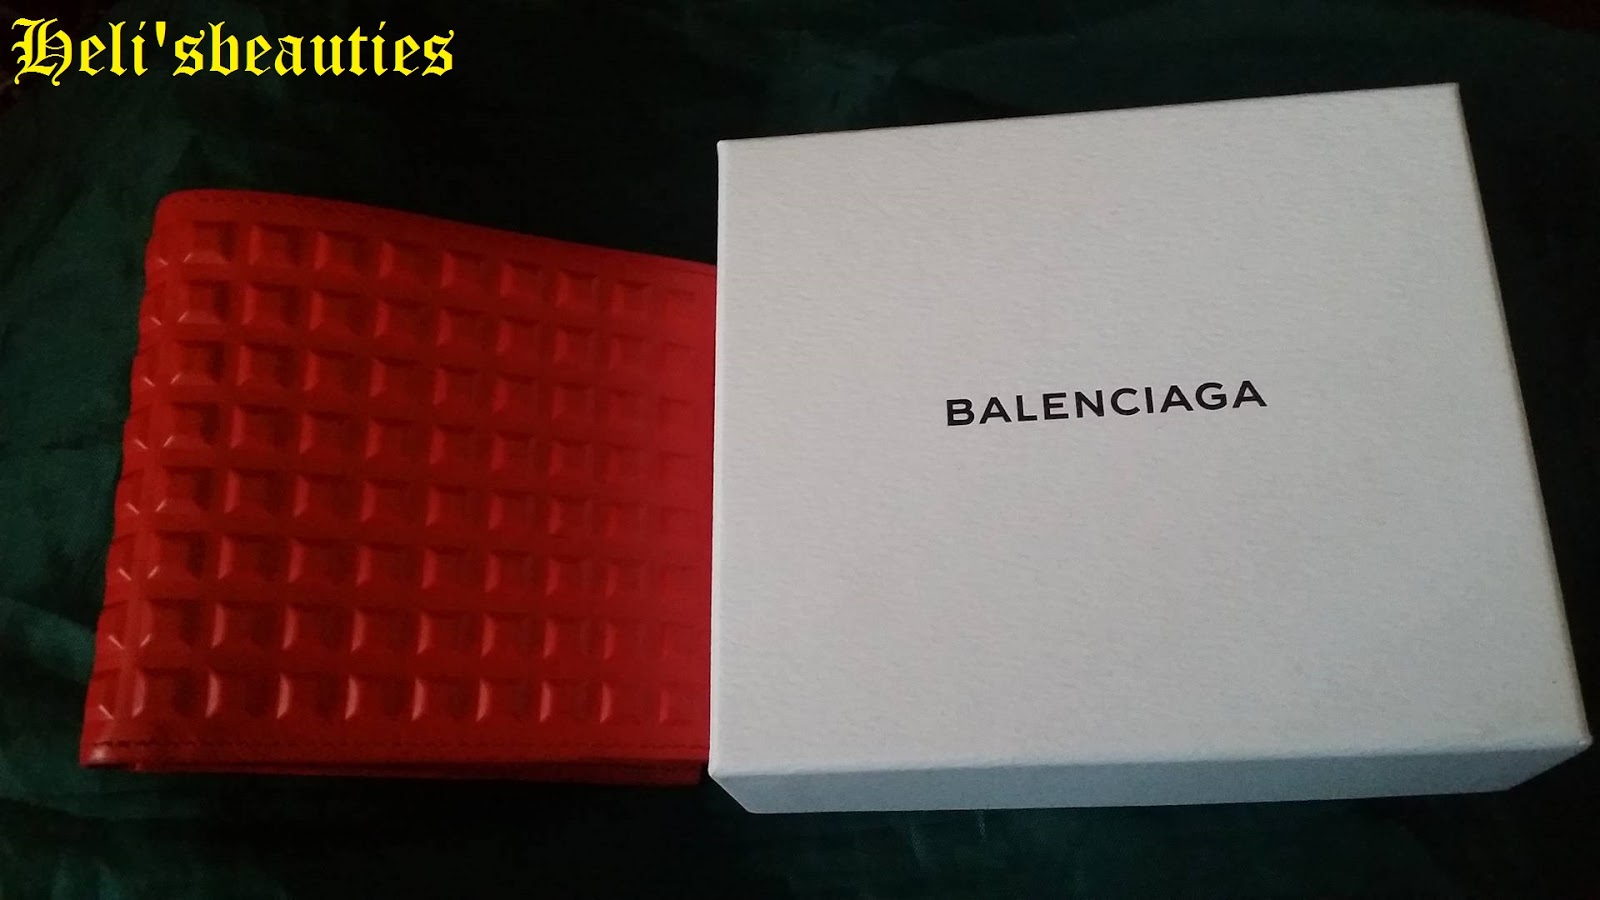 Heli'sbeauties: Balenciaga Studded Billfold Wallet in Red Review